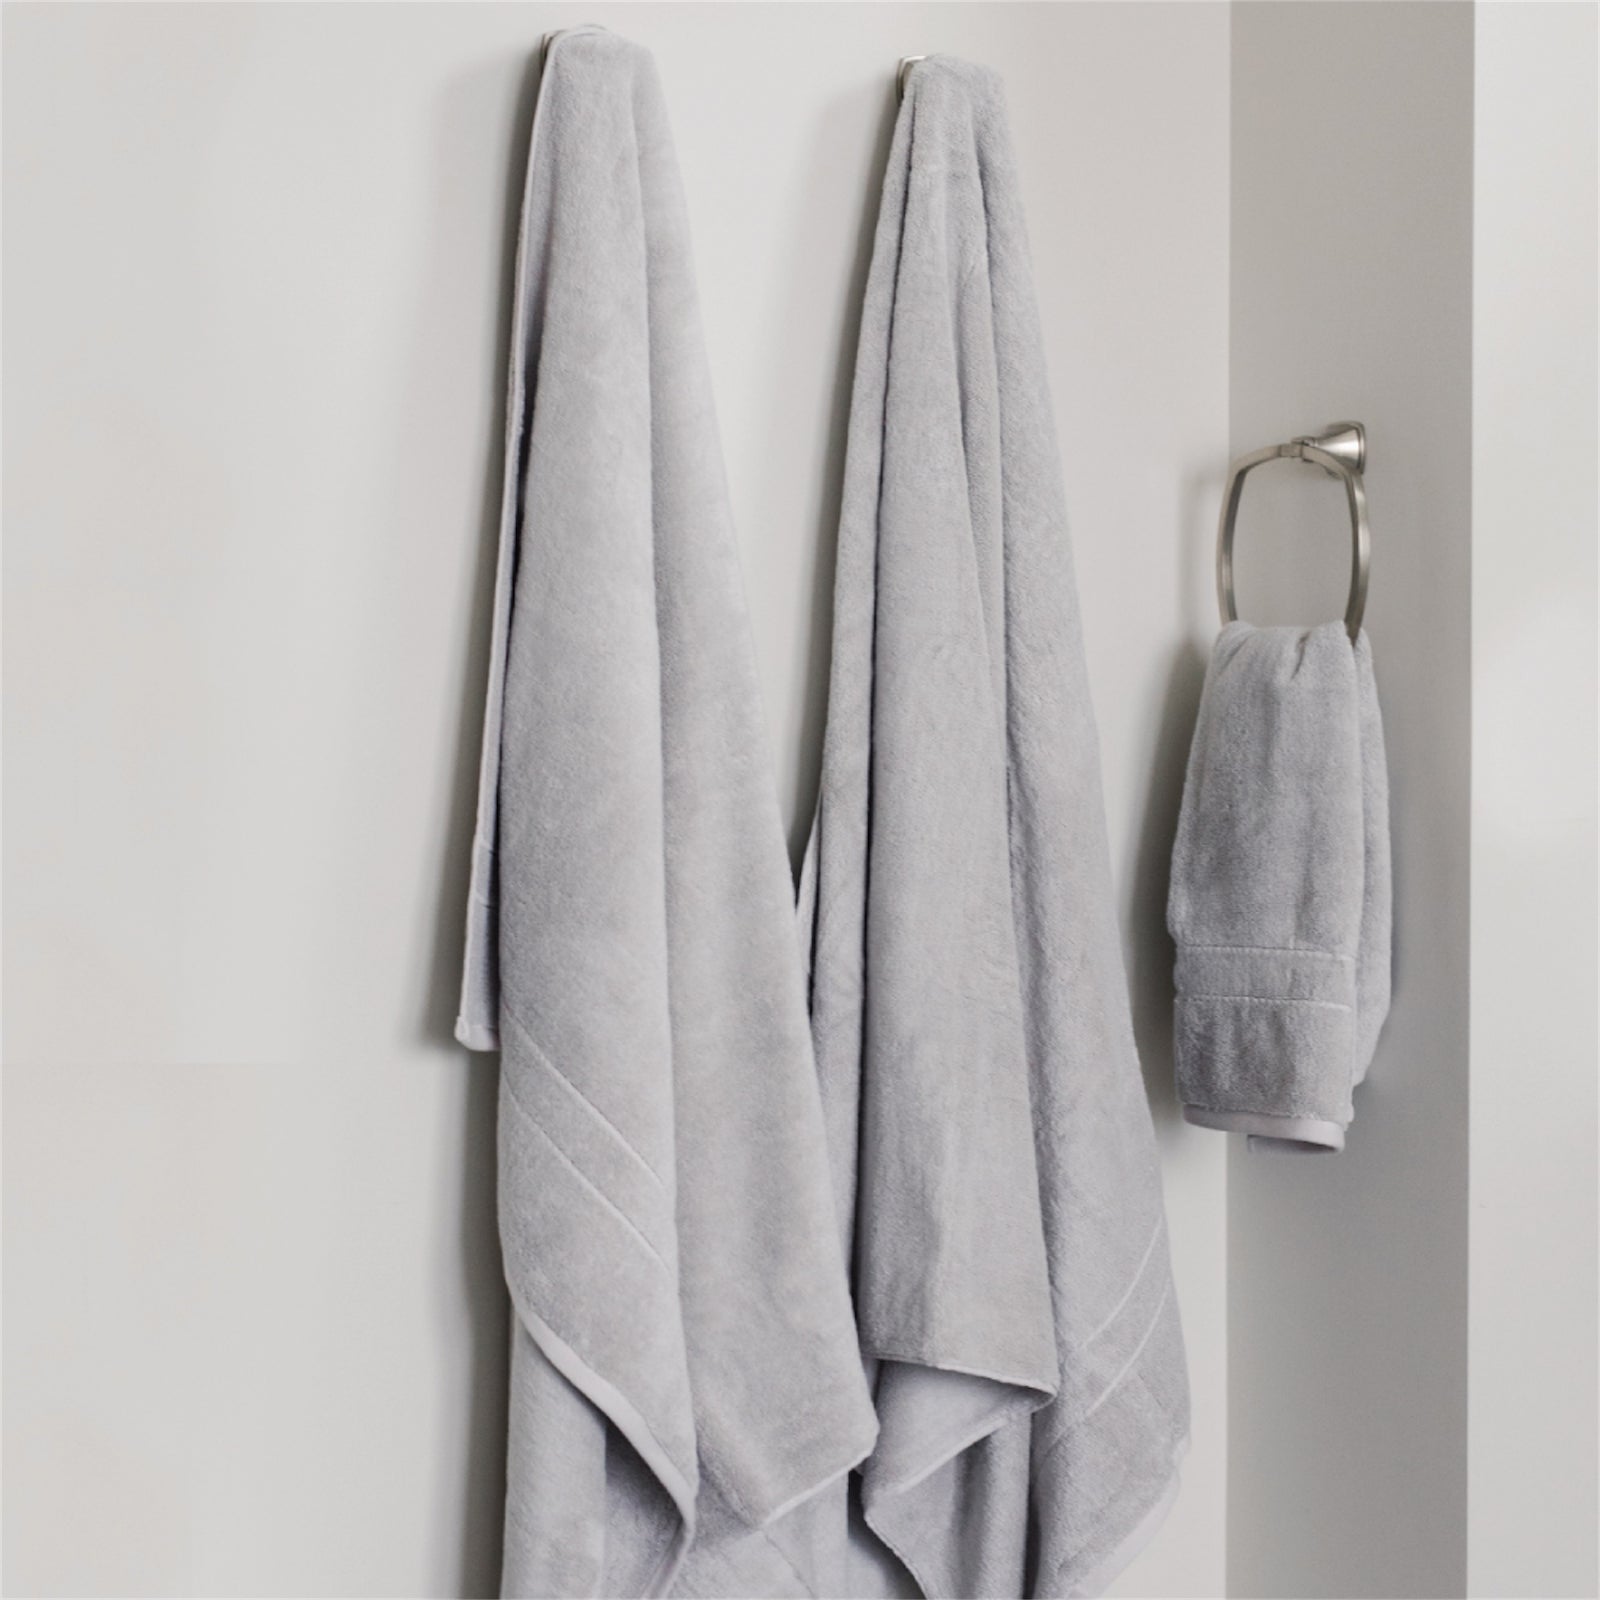 Premium Plush Bath Towels in the color Light Grey. Photo of Premium Plush Bath Towels taken in a bathroom showing the towels which are hung from a towel rack. 